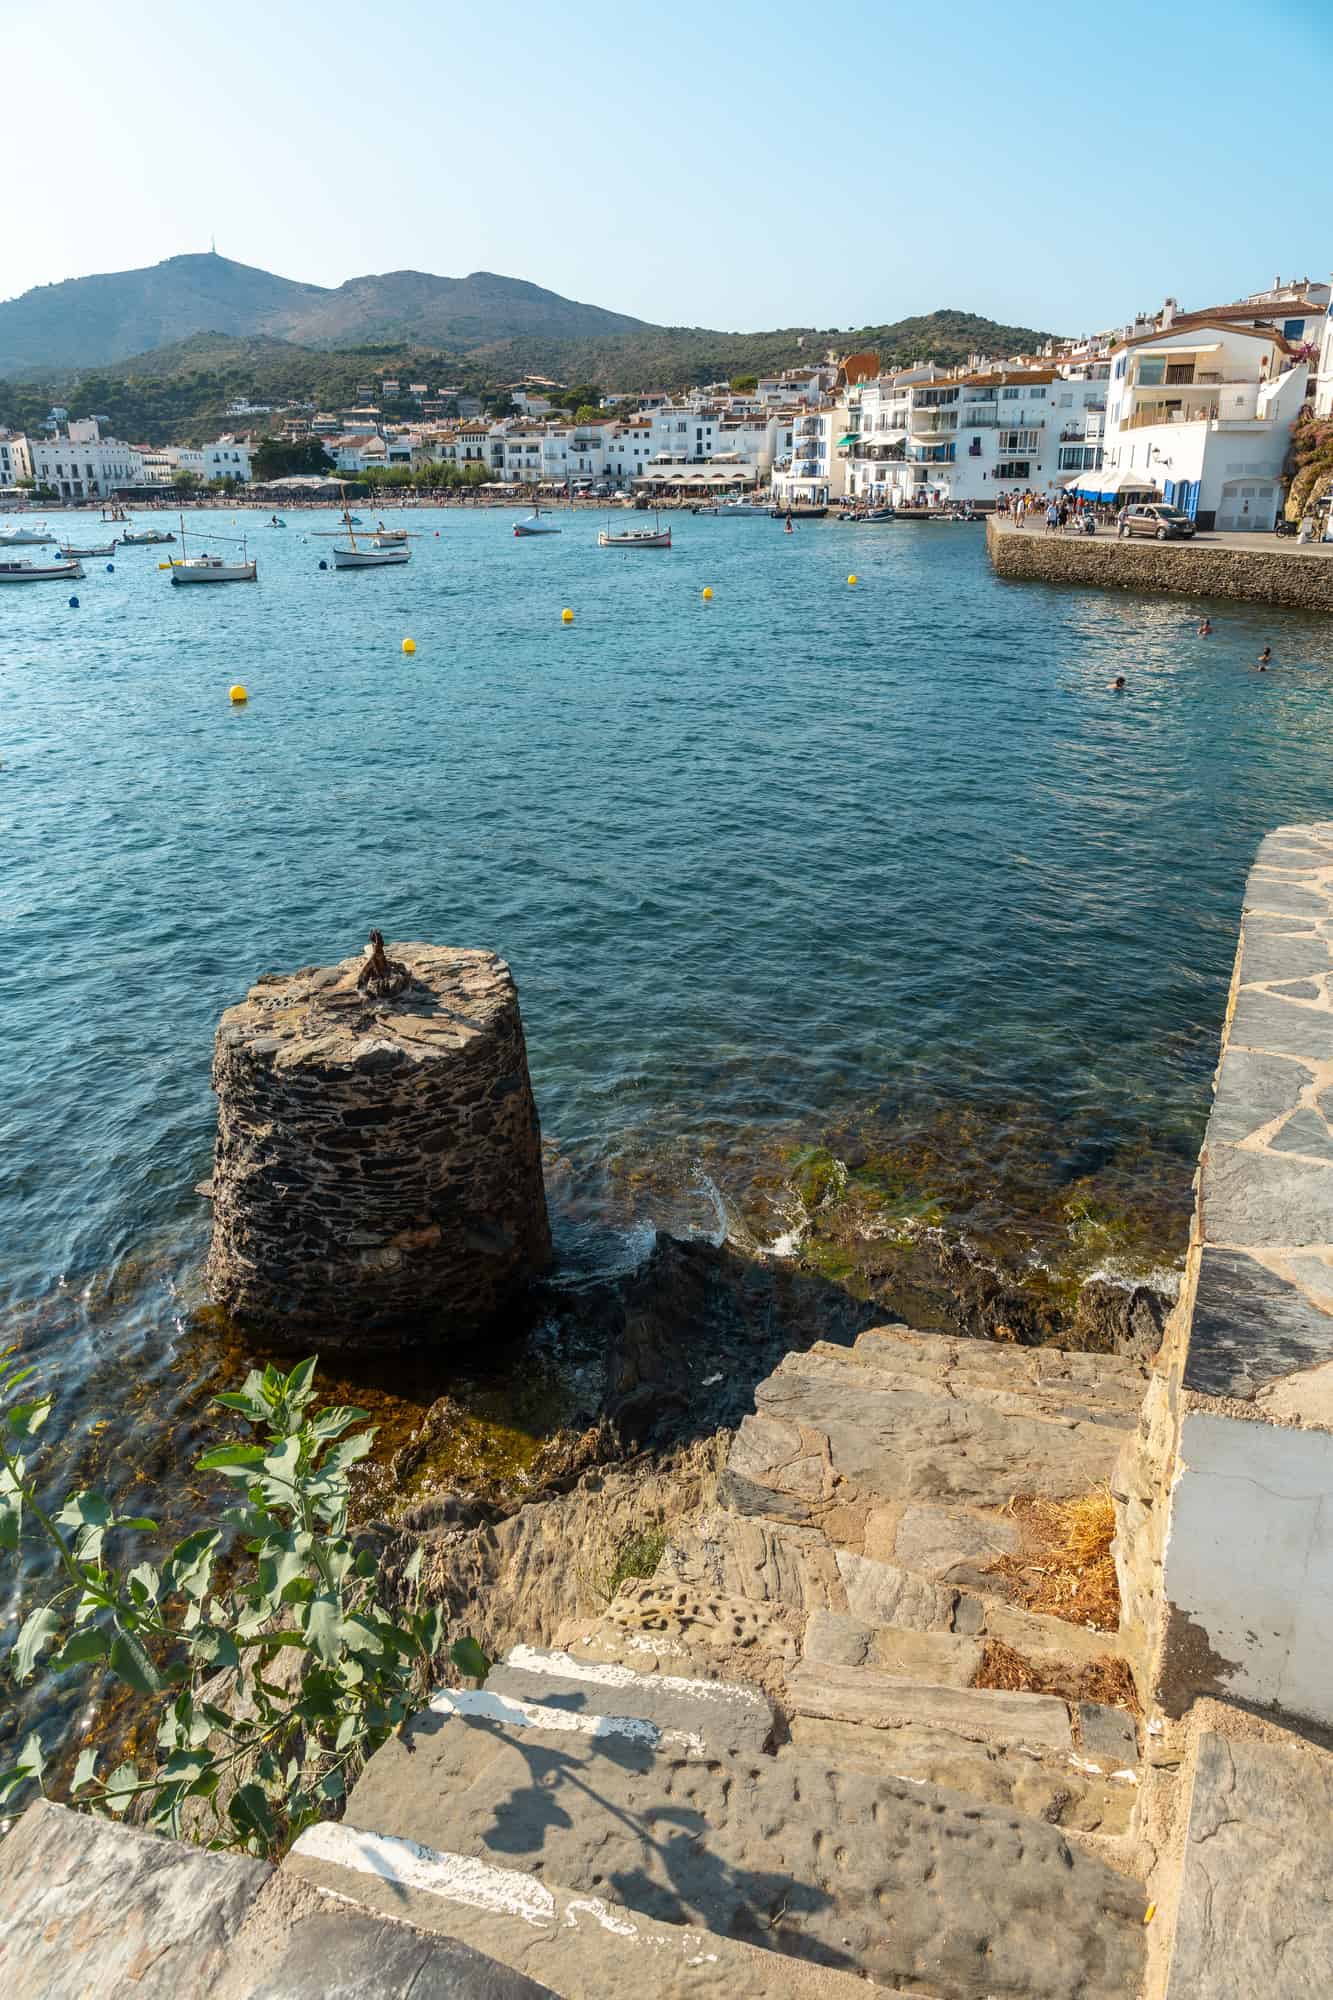 Boats on the beach of the coast of Cadaques, town on the Costa Brava of Catalonia